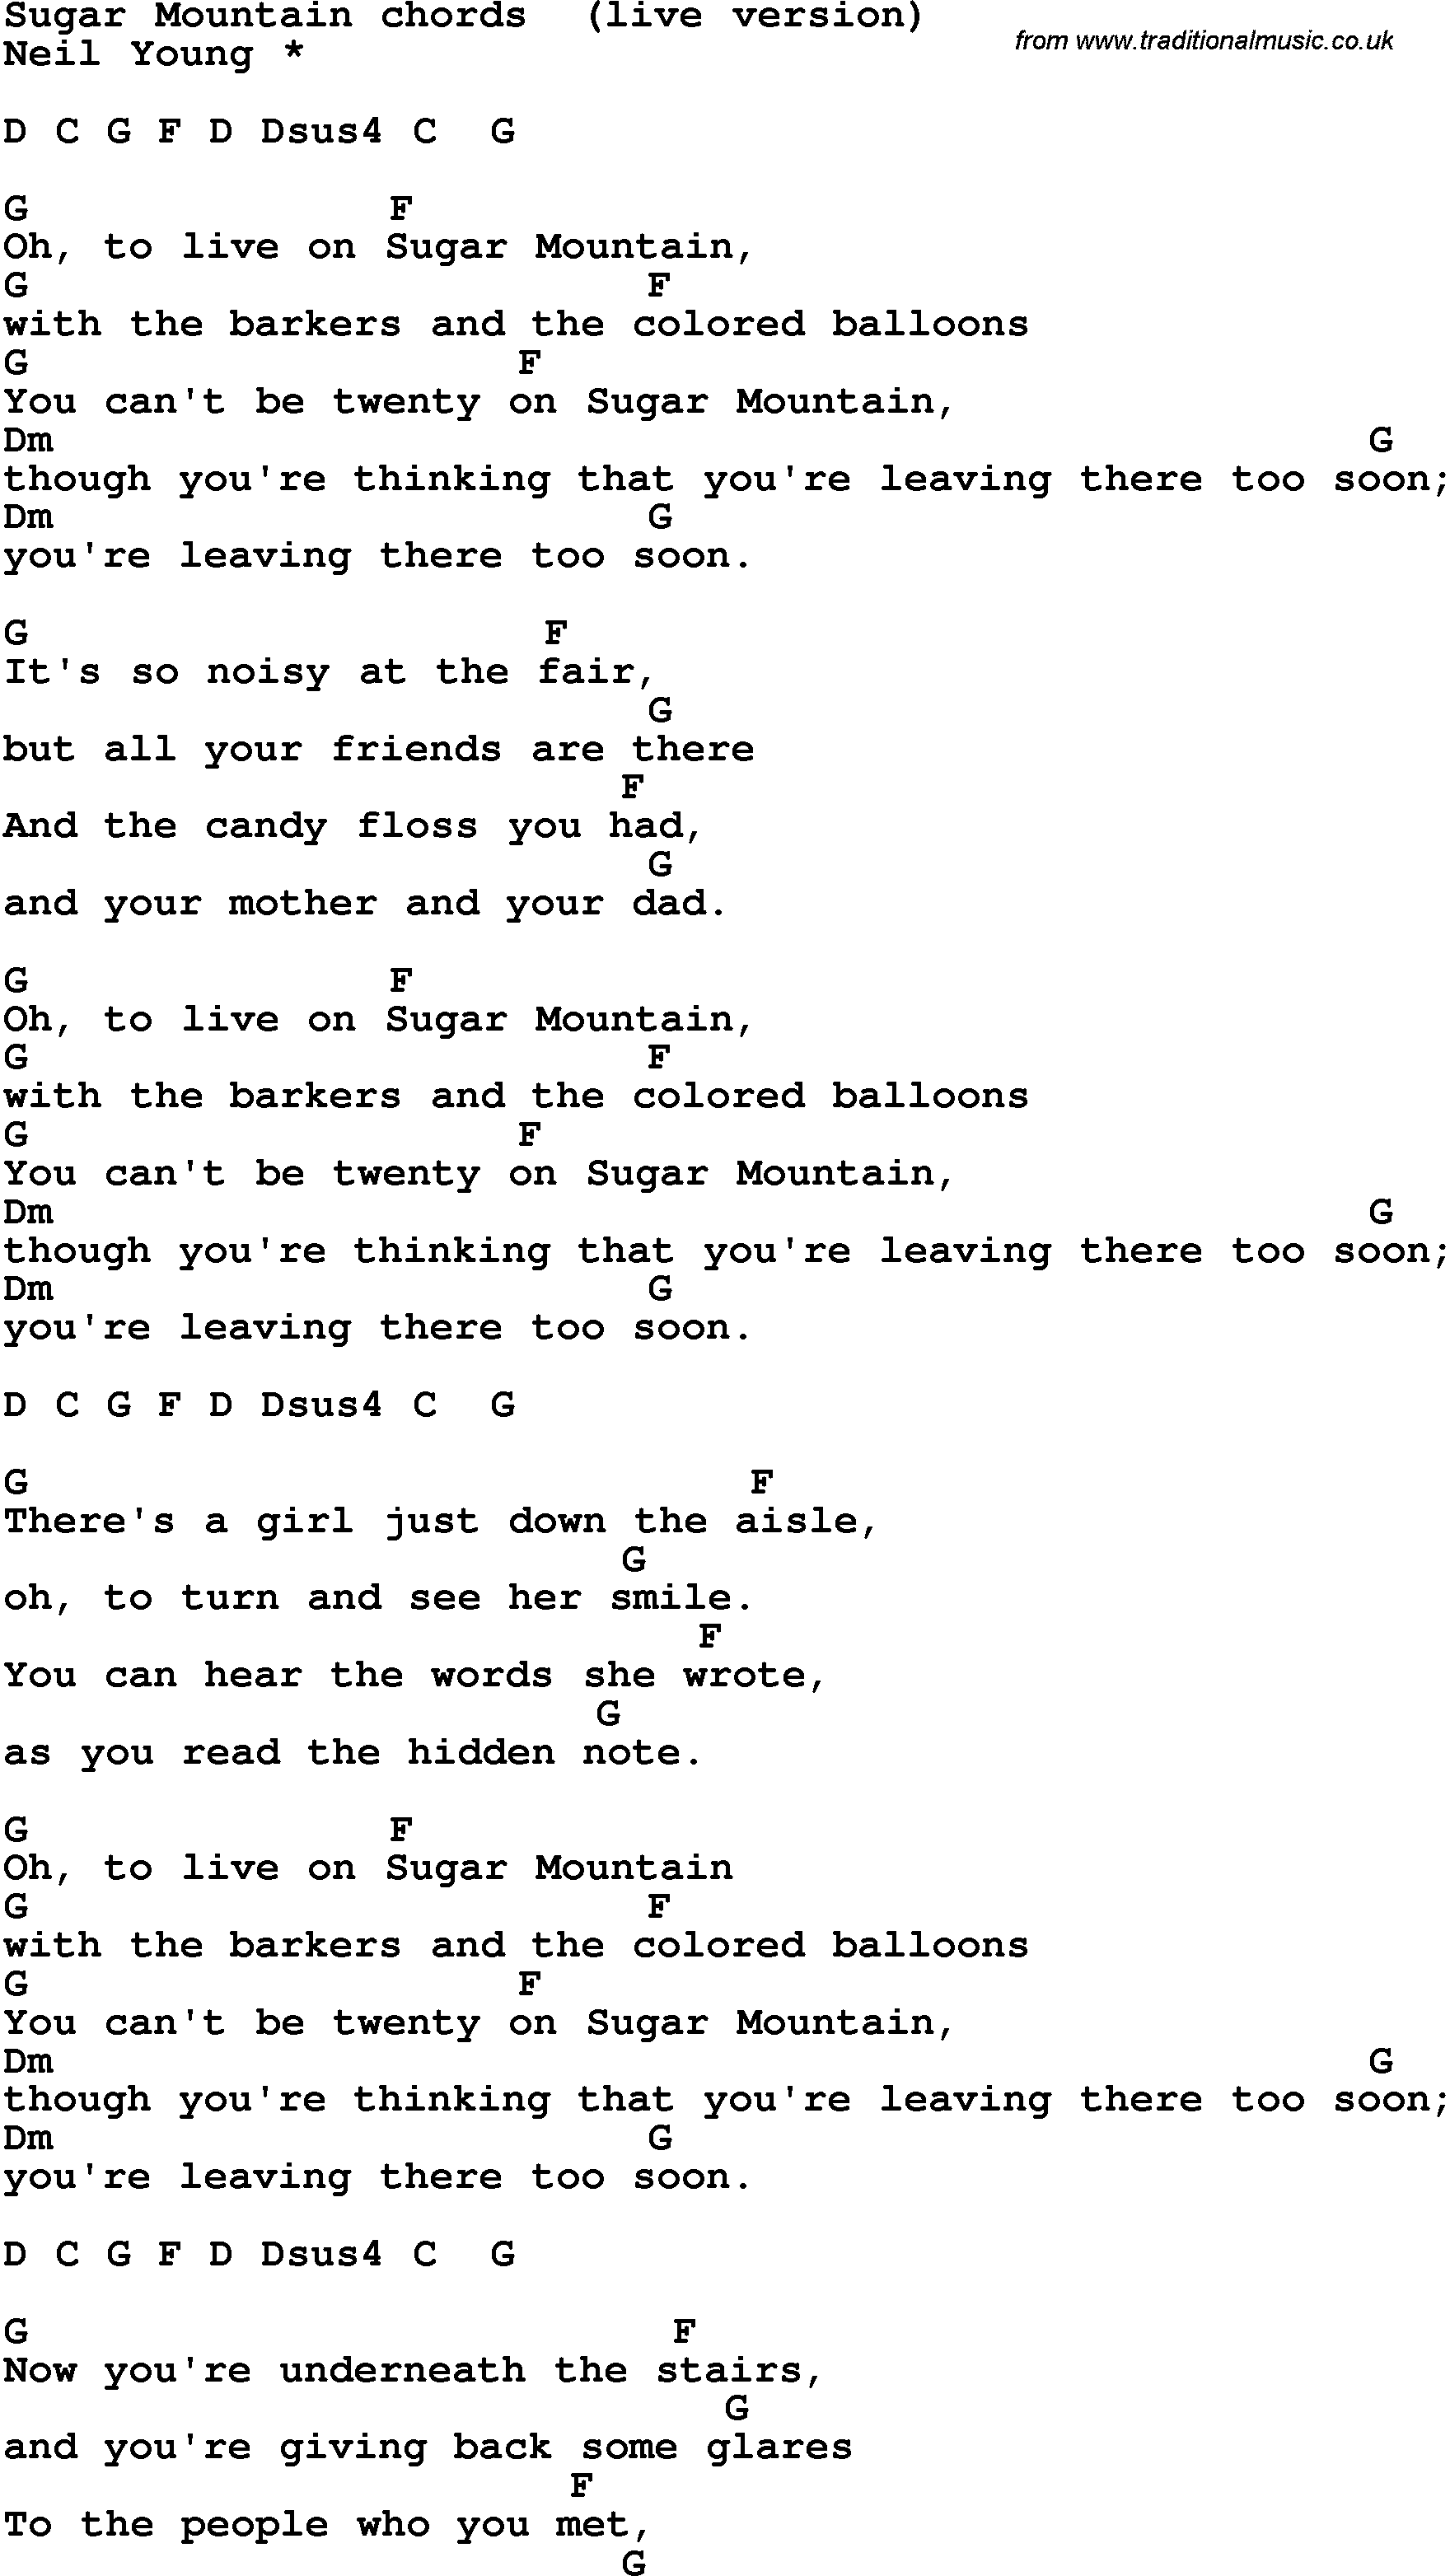 Song Lyrics with guitar chords for Sugar Mountain